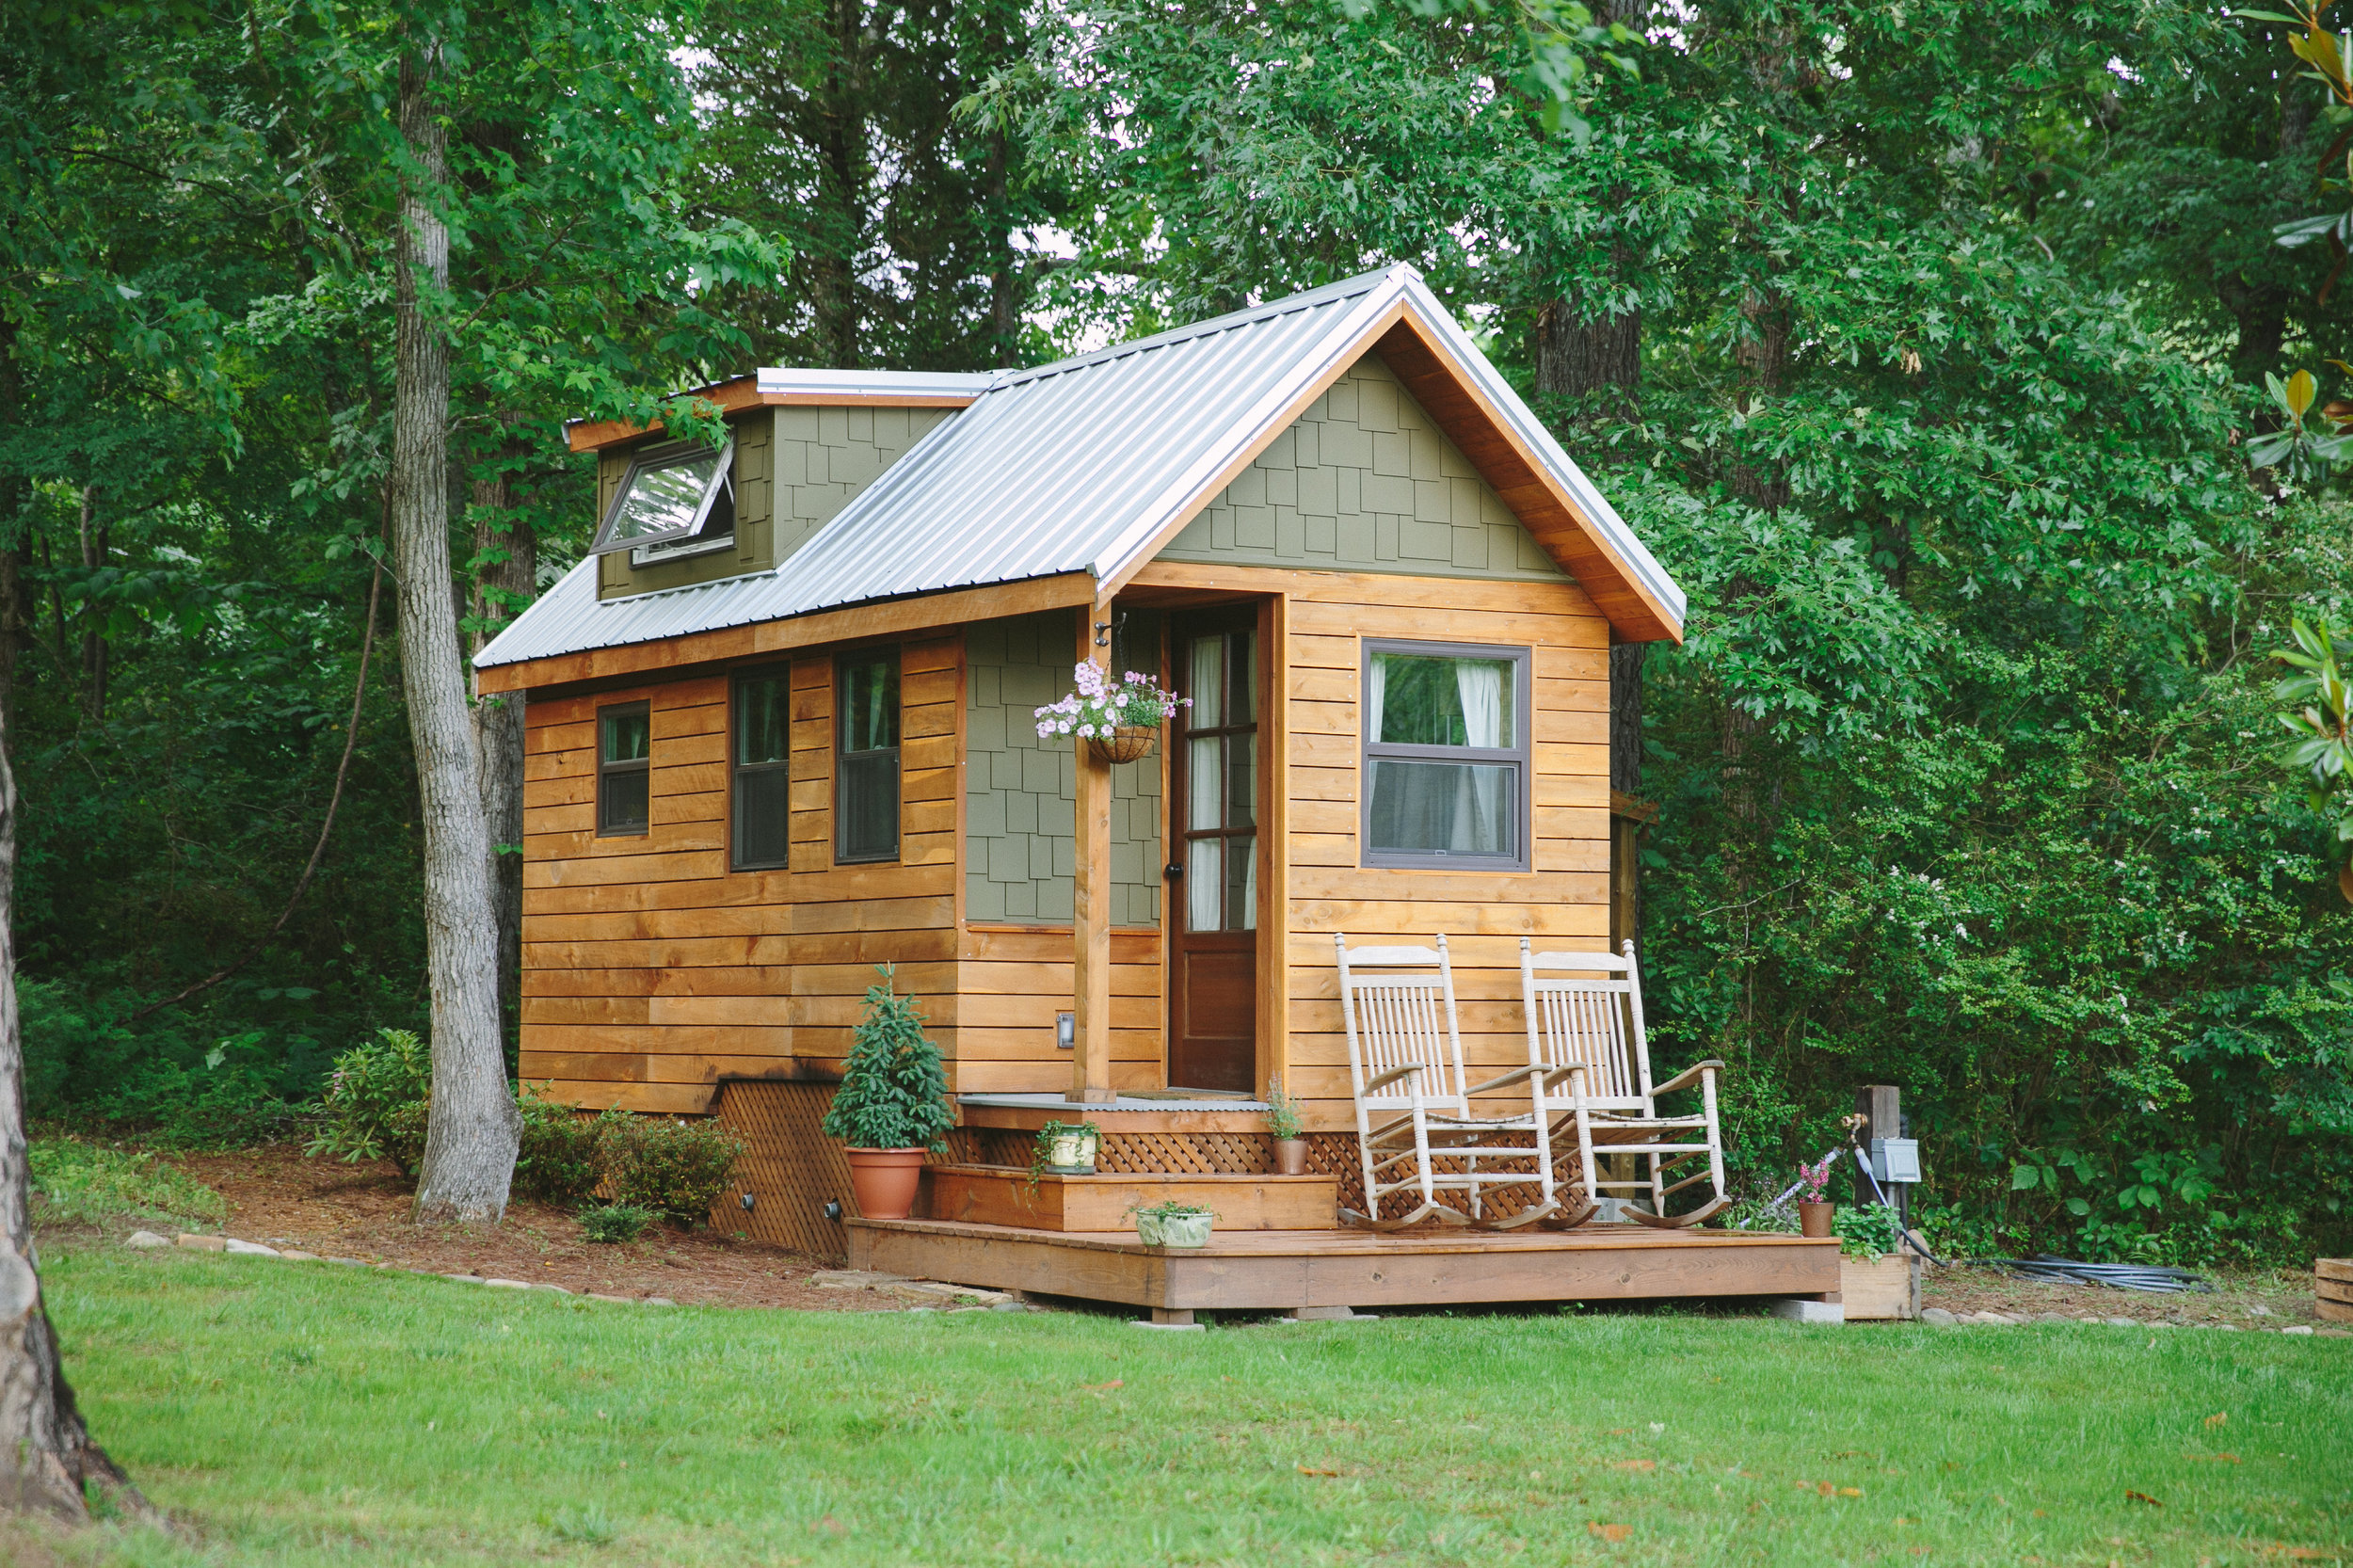 Example of a Tiny House